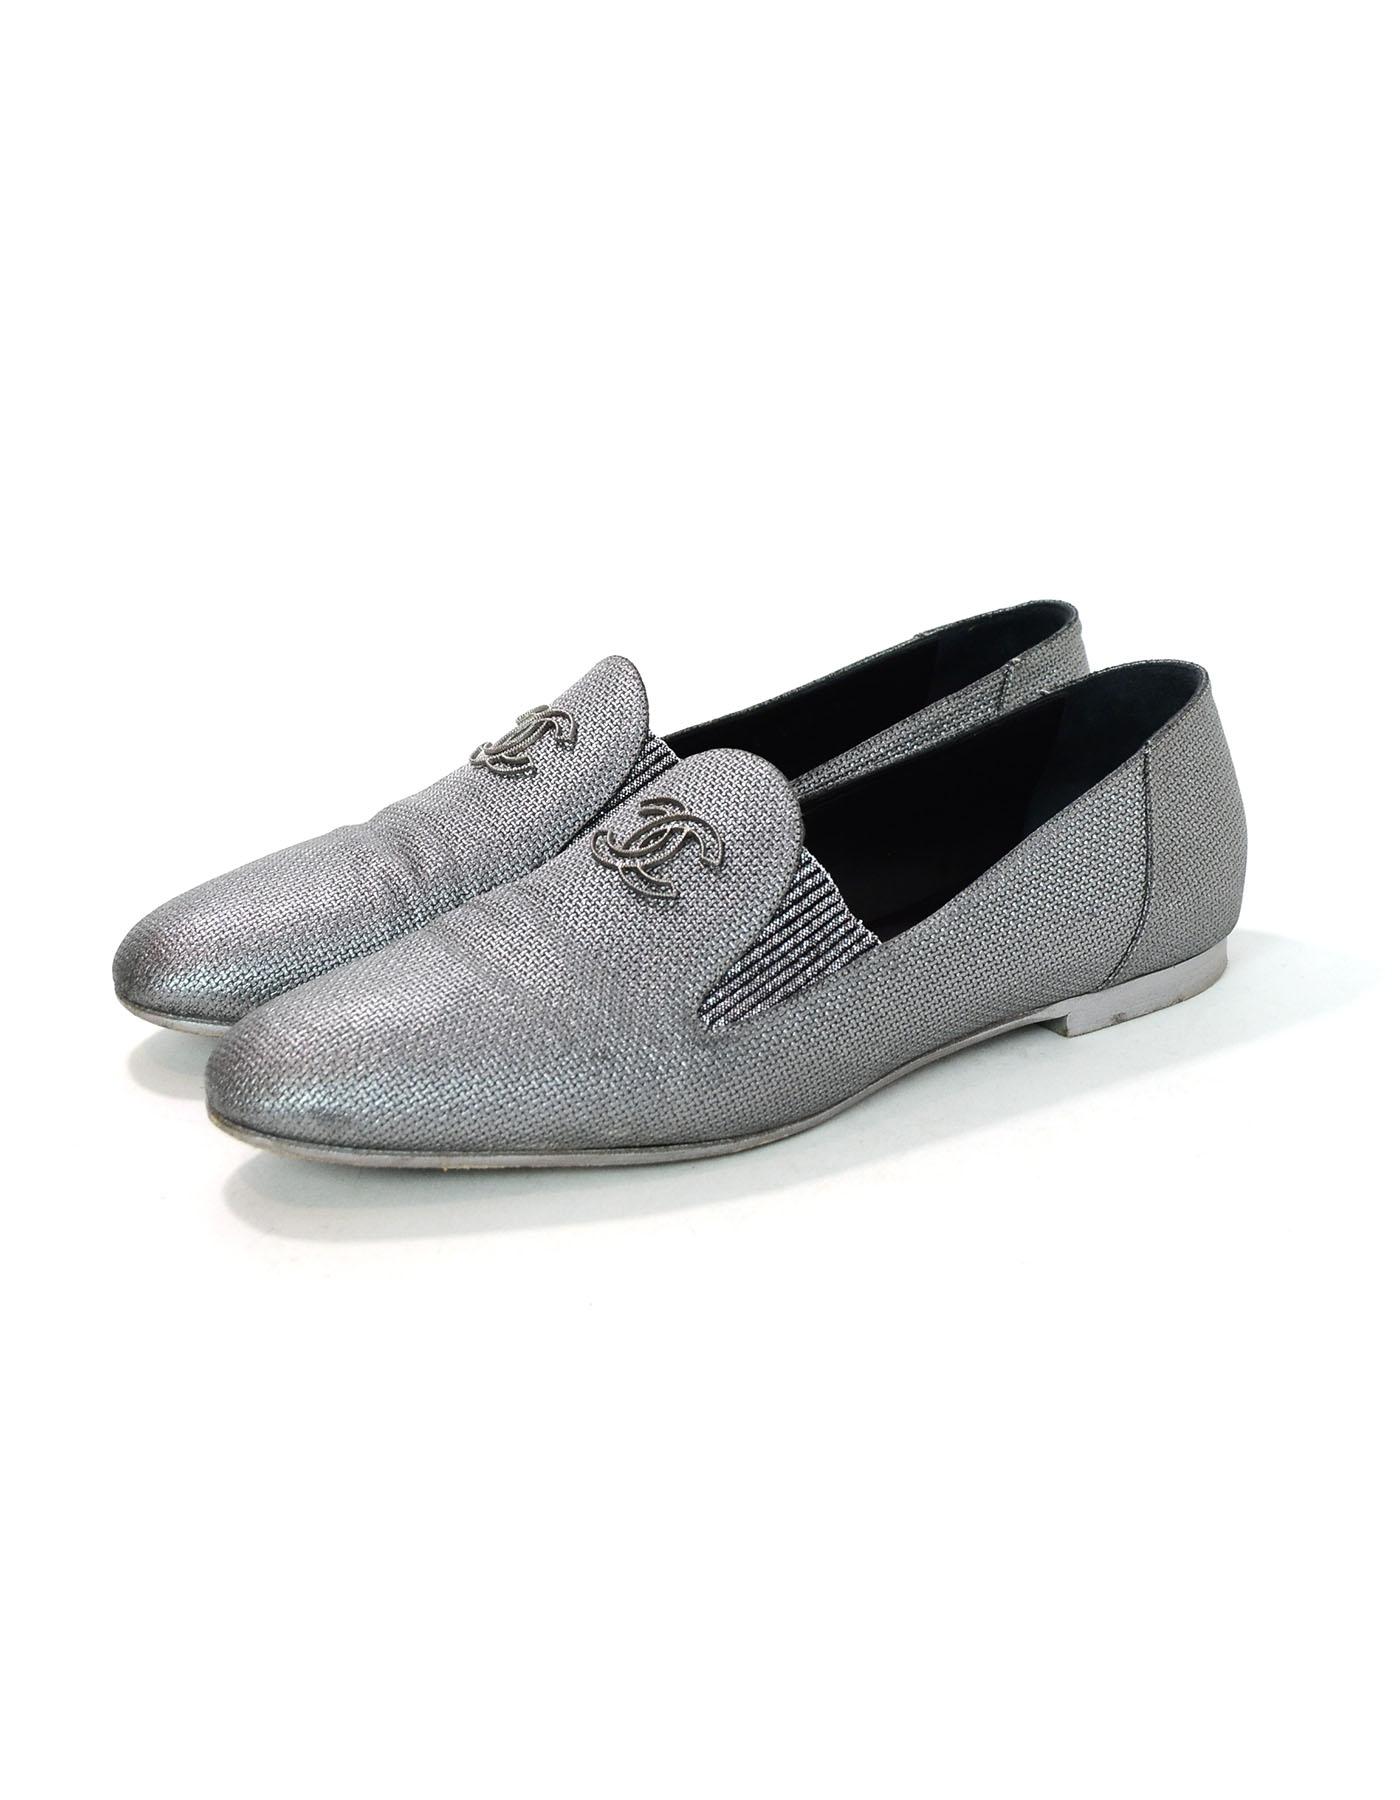 Chanel Dark Silver Raffia CC Loafers Sz 42

Made In: Italy
Color: Dark silver
Materials: Raffia, leather
Closure/Opening: Slide on
Sole Stamp: CC Made in Italy 42
Overall Condition: Excellent pre-owned condition with the exception of some creasing,